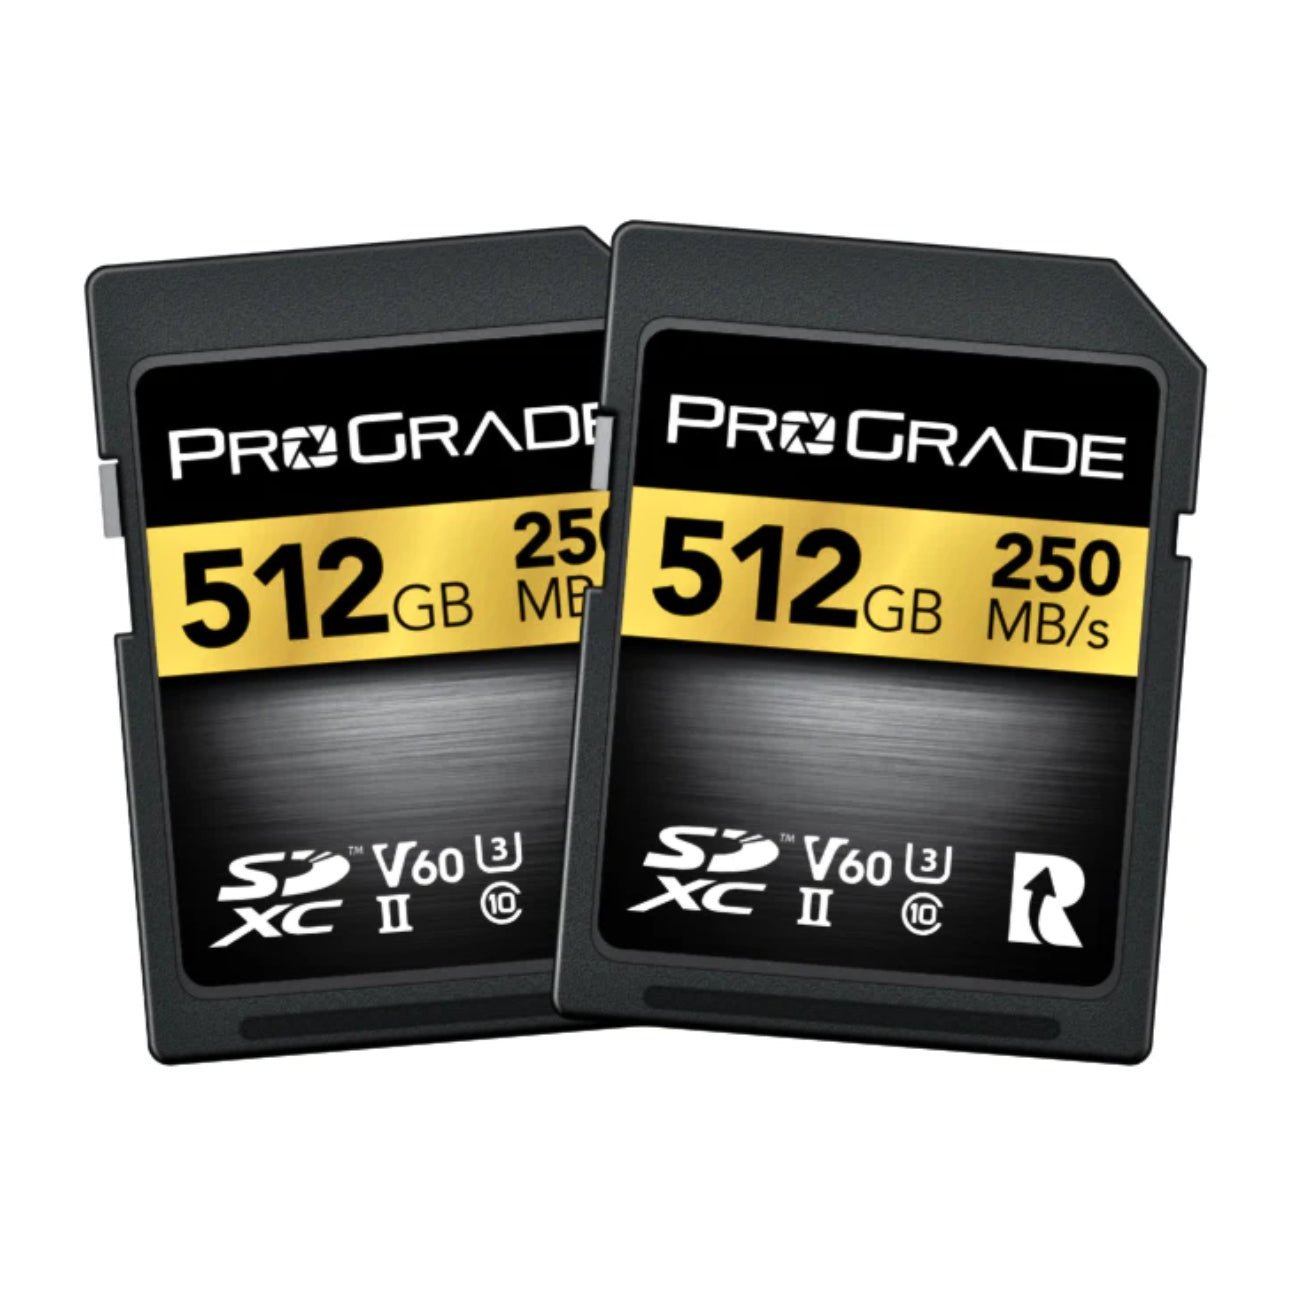 SD UHS-II 512GB Card V60 –Up to 130MB/s Write Speed and 250 MB/s Read Speed | for Professional Vloggers, Filmmakers, Photographers & Content Curators – by Prograde Digital / v60 card